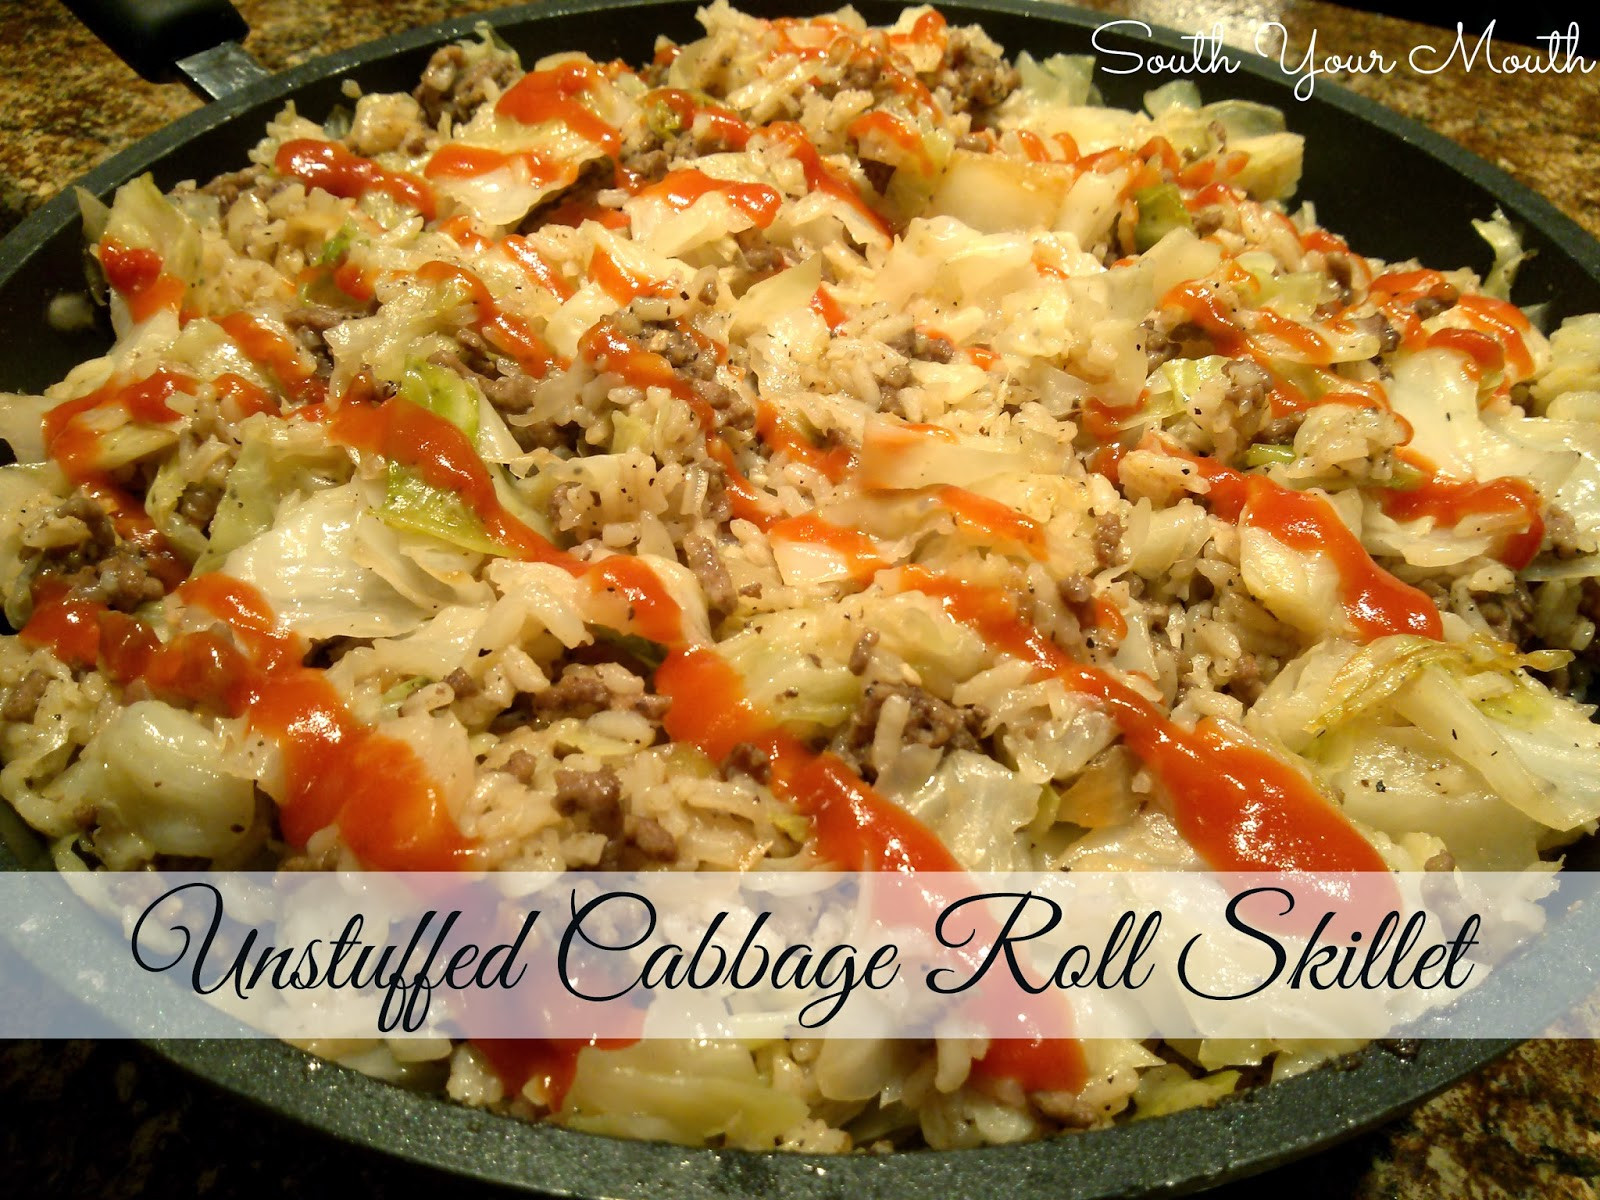 Unstuffed Cabbage Rolls With Rice
 South Your Mouth Unstuffed Cabbage Roll Skillet